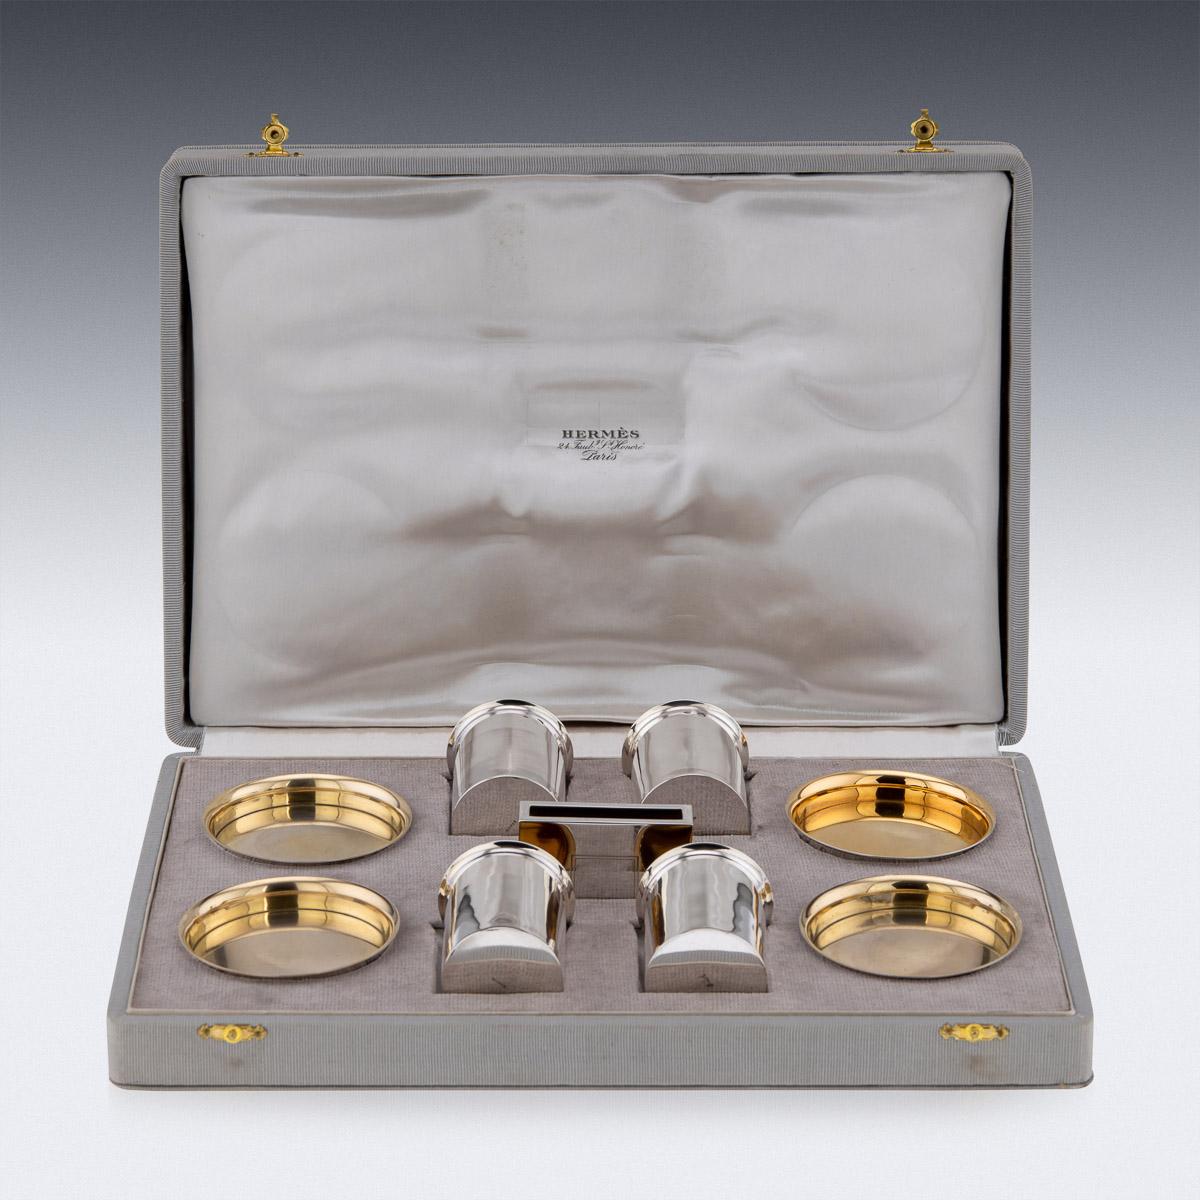 20th Century Art Deco Hermes 9 piece vermeil solid silver smoker's requisites, contained in the original large Hermes fitted grosgrain case, comprising four cigarette canisters, four ashtrays, a match holder. Hallmarked French silver (950 standard),